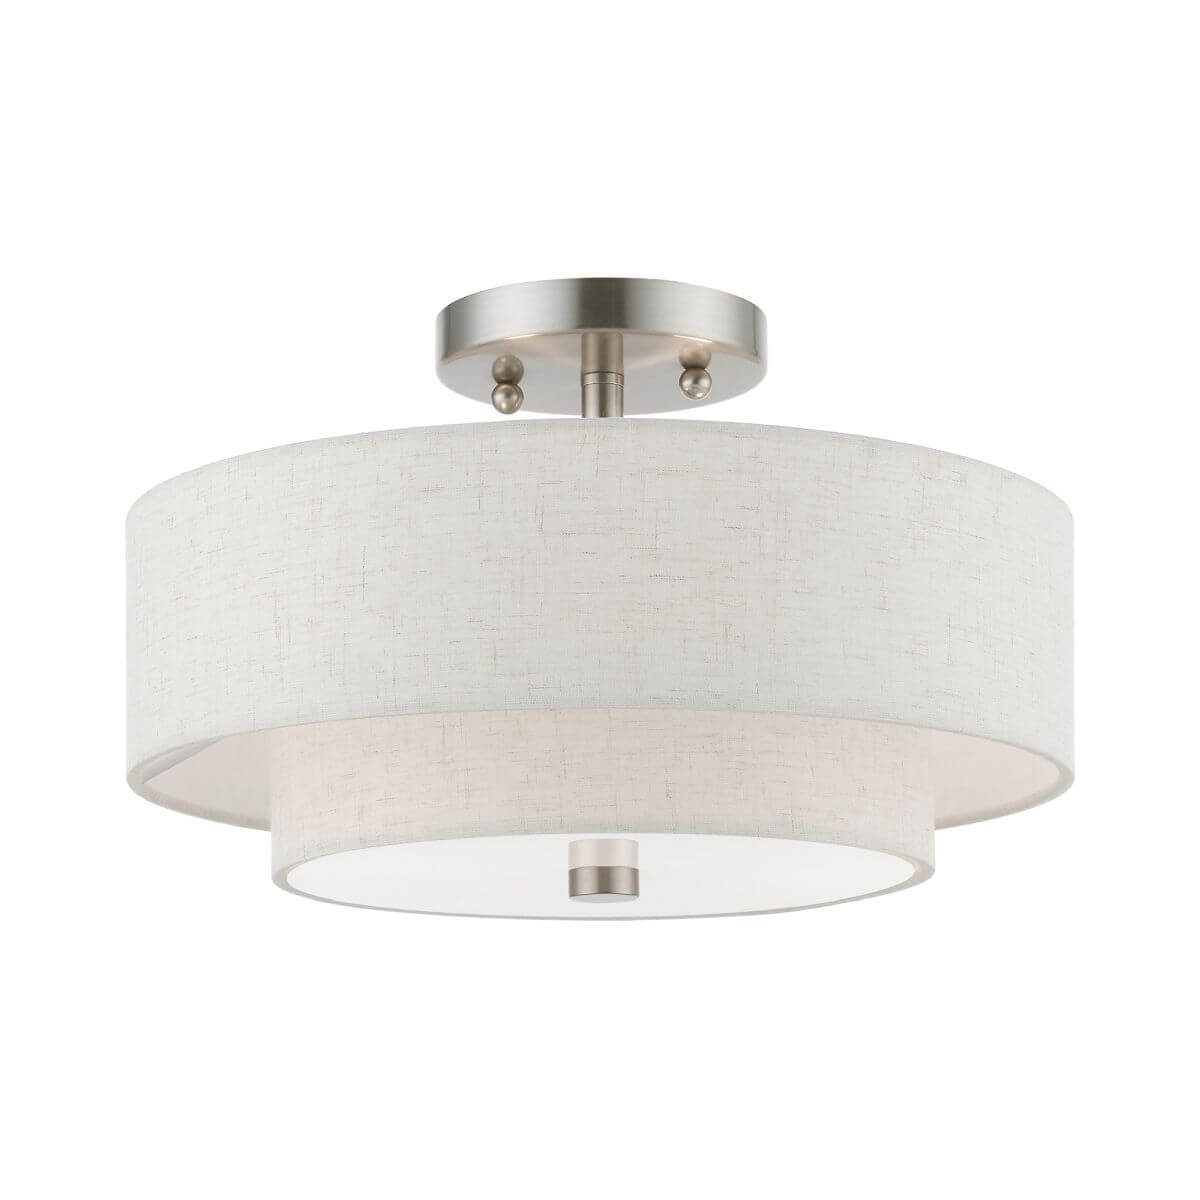 2 Light 13 inch Semi-Flush Mount in Brushed Nickel with Hand Crafted Oatmeal Color Hardback Fabric Shade - White Fabric Inside - 245465